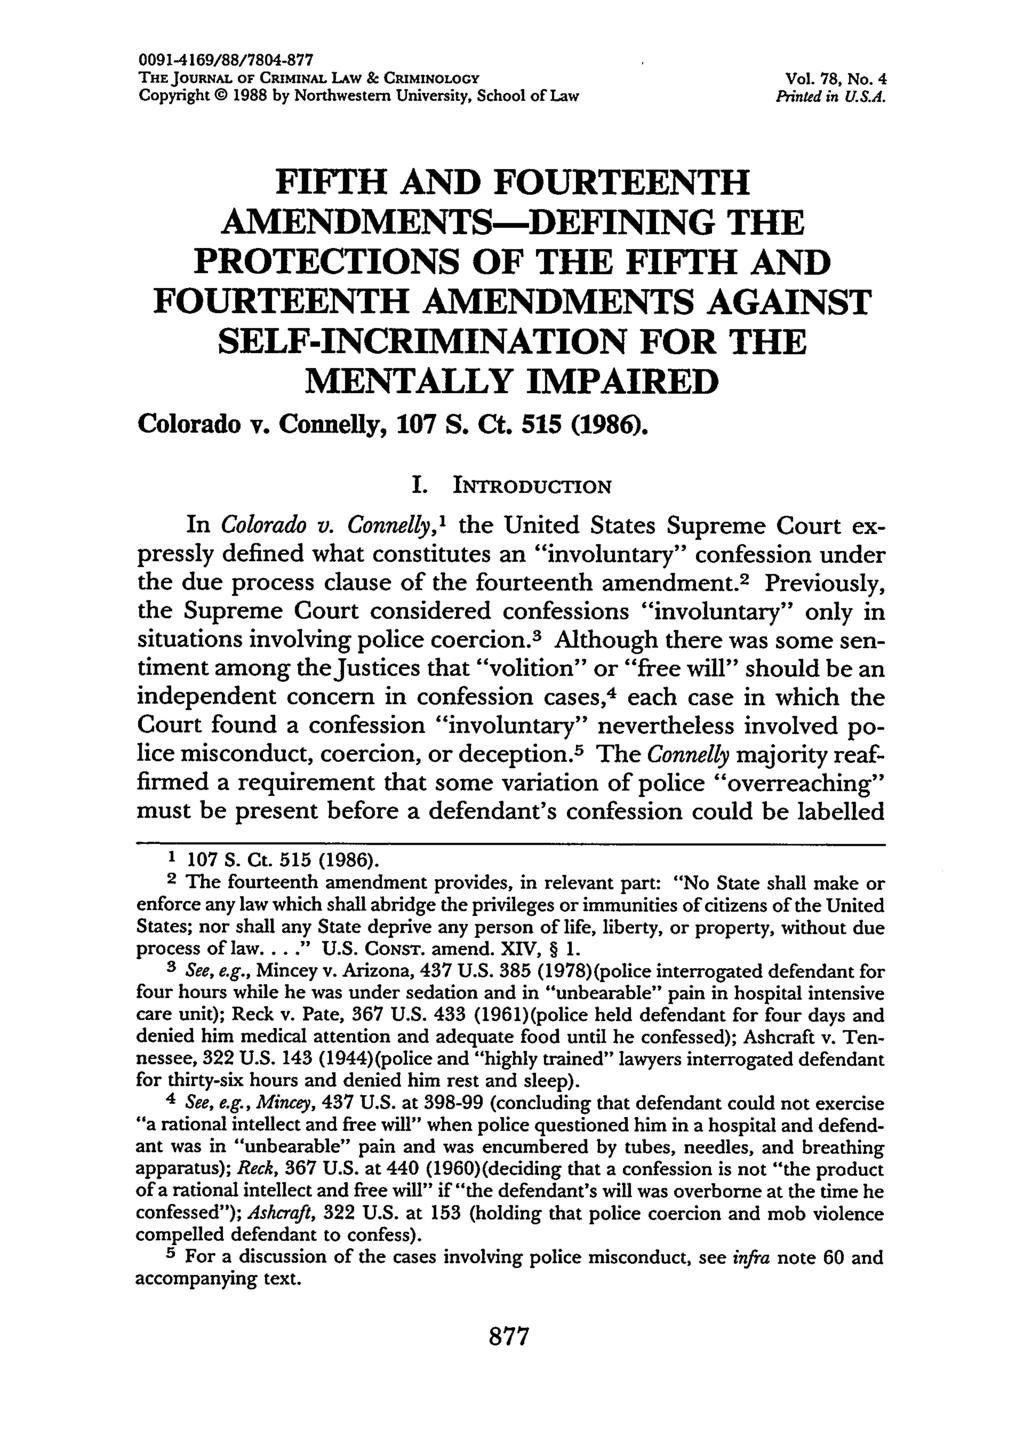 0091-4169/88/7804-877 THE JOURNAL OF CRIMINAL LAW & CRIMINOLOGY Vol. 78, No. 4 Copyright 0 1988 by Northwestern University, School of Law Printed in U.S.A. FIFTH AND FOURTEENTH AMENDMENTS-DEFINING THE PROTECTIONS OF THE FIFTH AND FOURTEENTH AMENDMENTS AGAINST SELF-INCRIMINATION FOR THE MENTALLY IMPAIRED Colorado v.